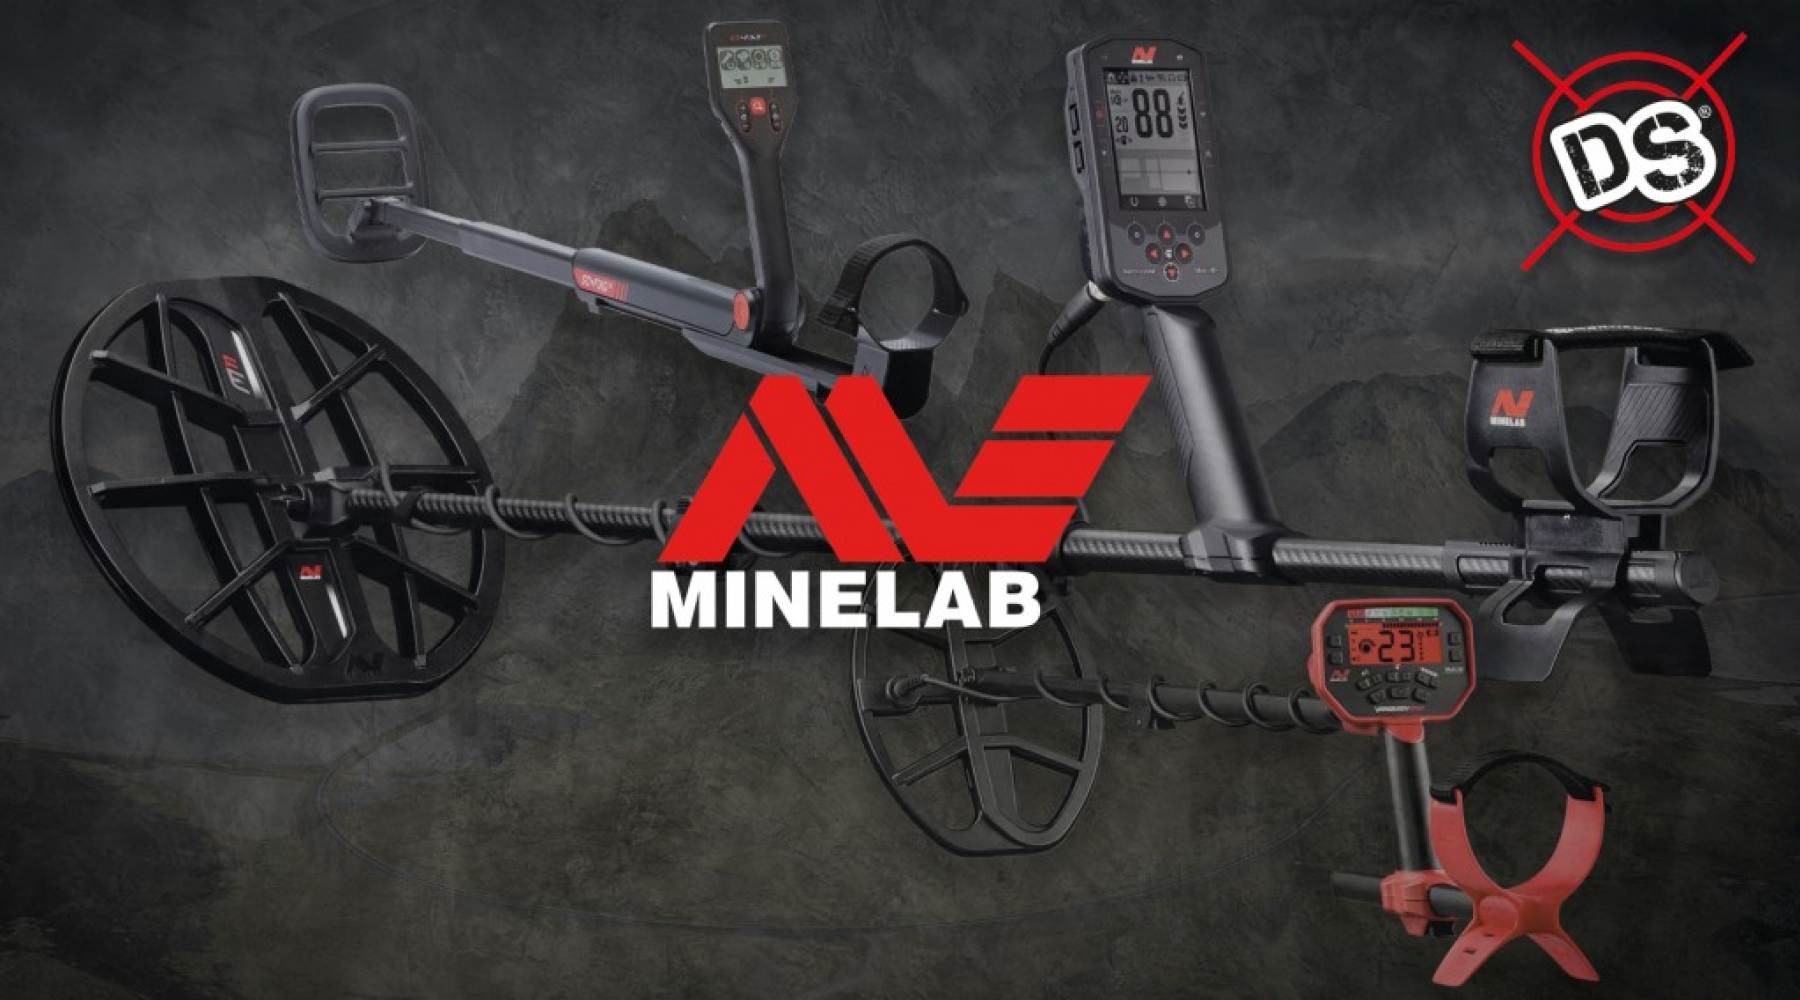 Many new Minelab surprises: products not to be missed!